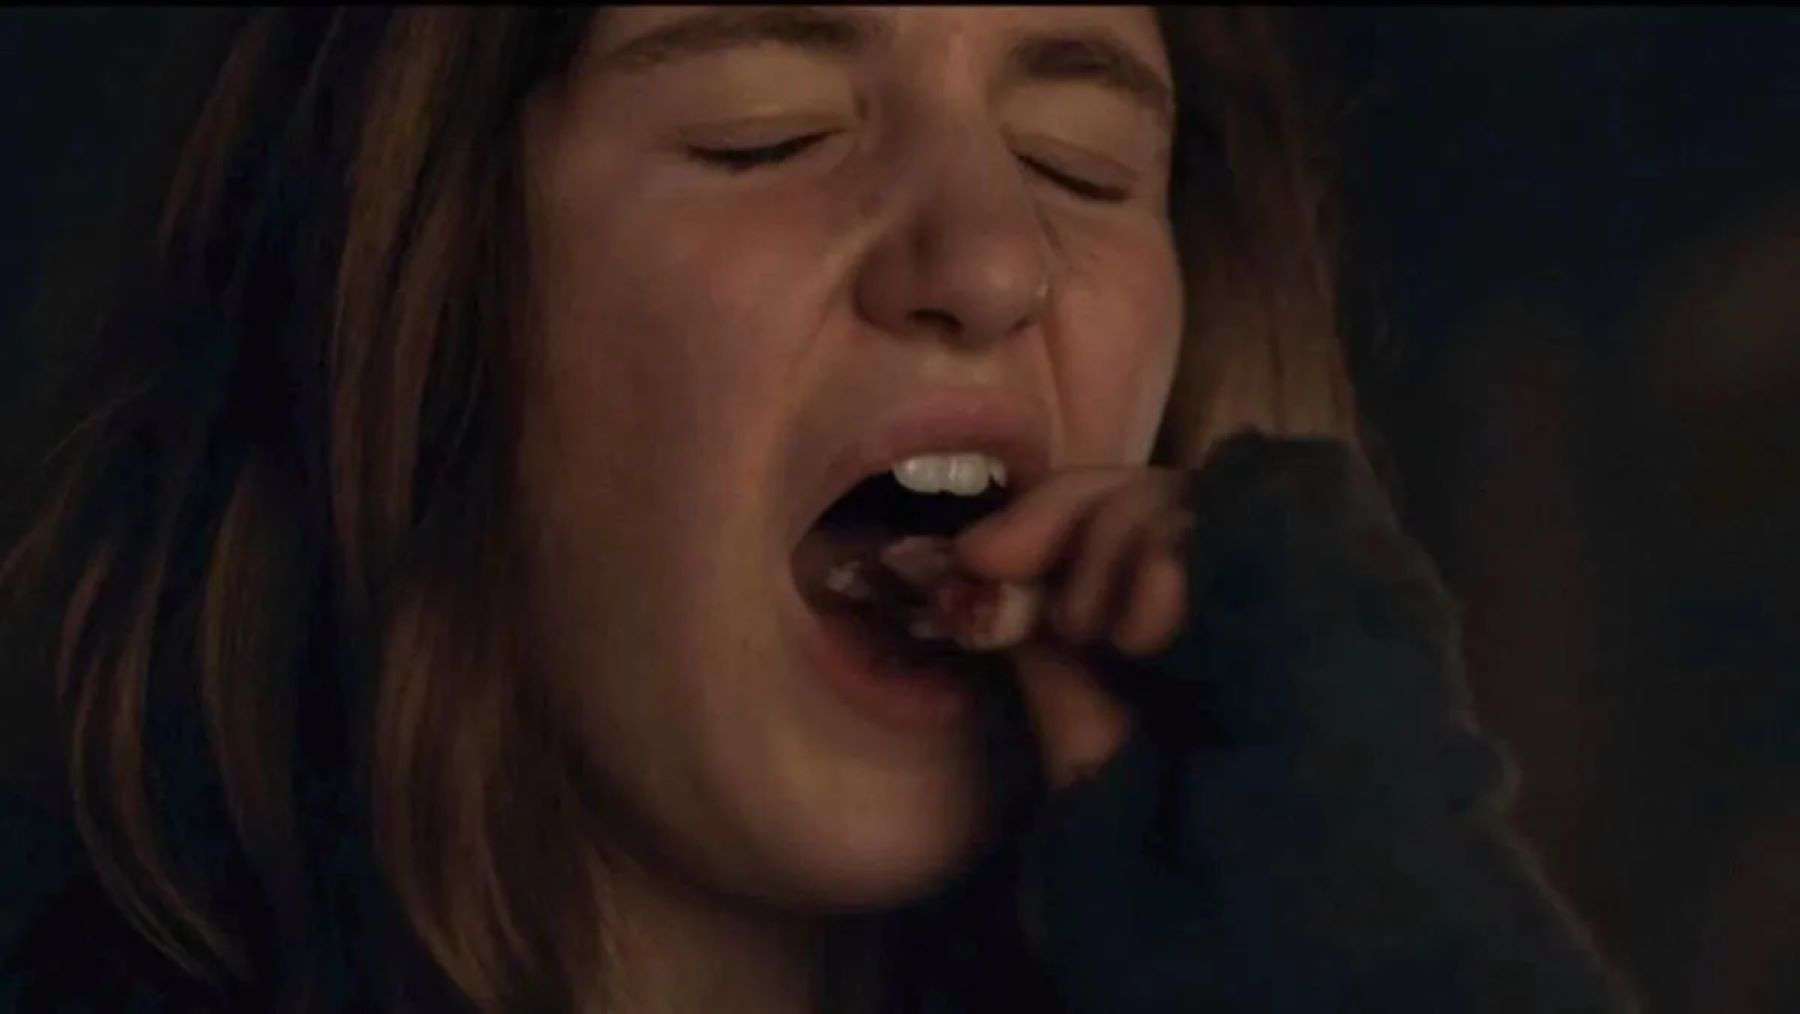 A girl puts something in her mouth in this photo by Showtime.